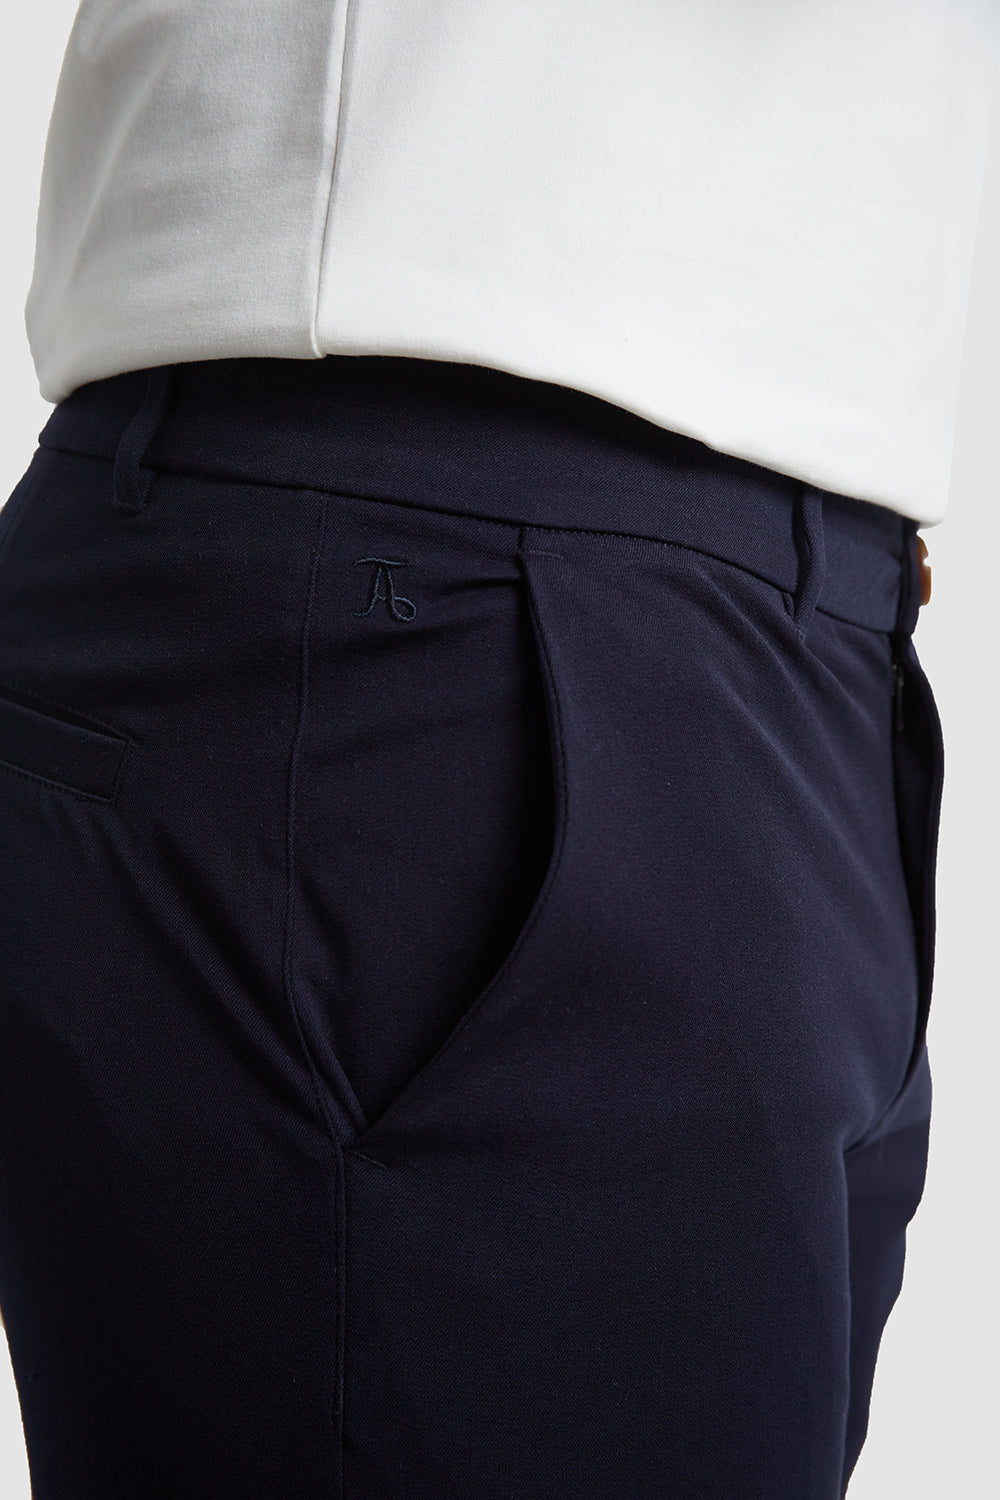 - Athletic Fit Navy ATHLETE Chino Shorts - TAILORED in USA